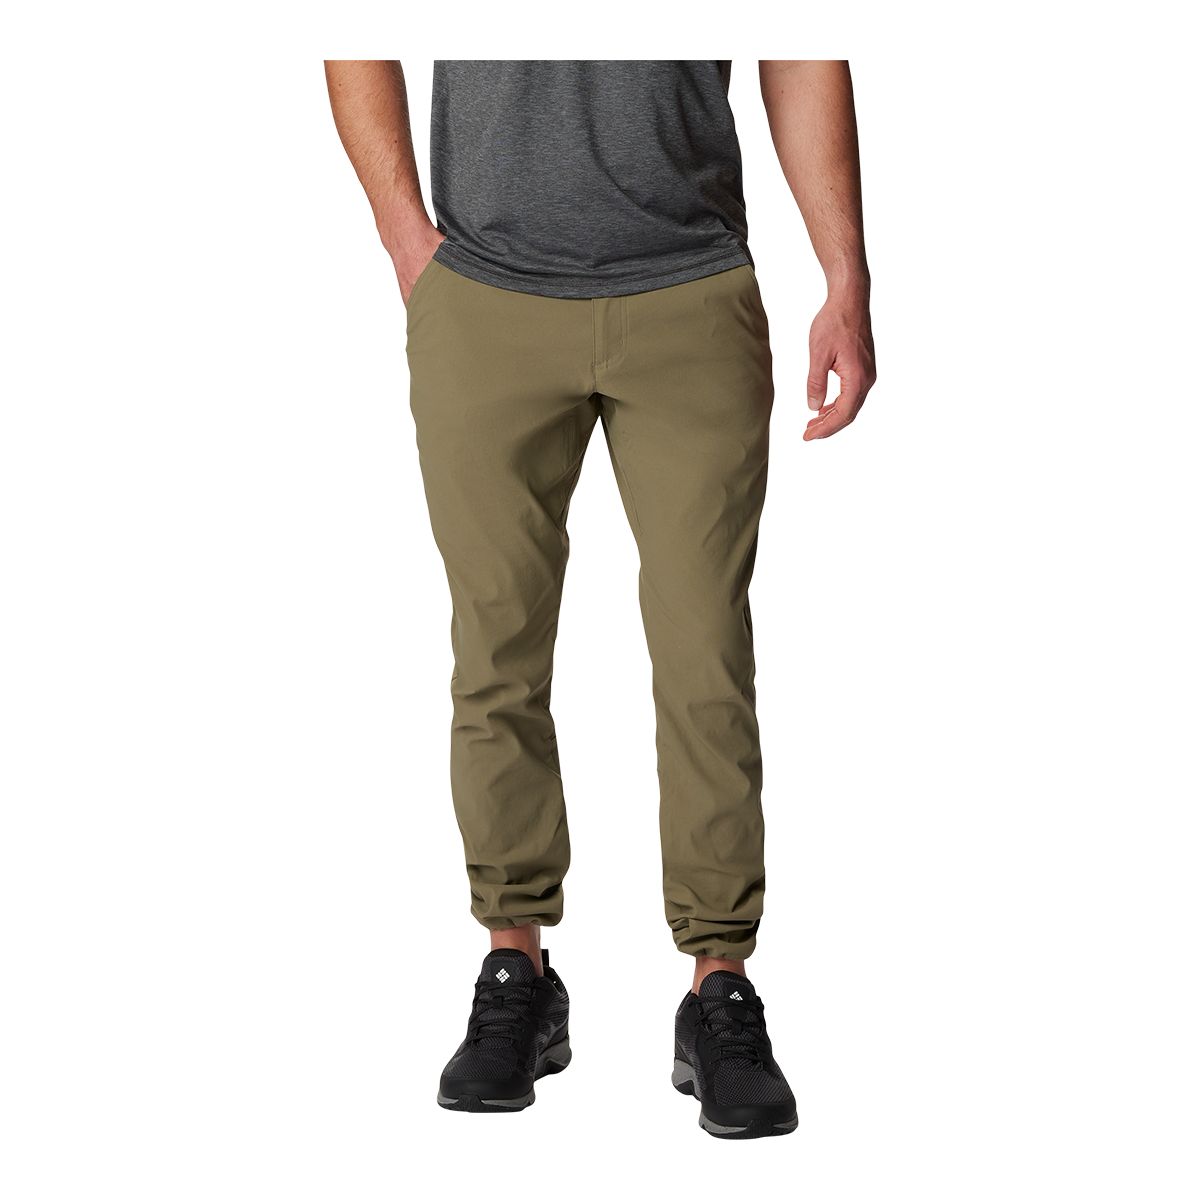 Under Armour Performance Chino Jogger - Men's - Clothing